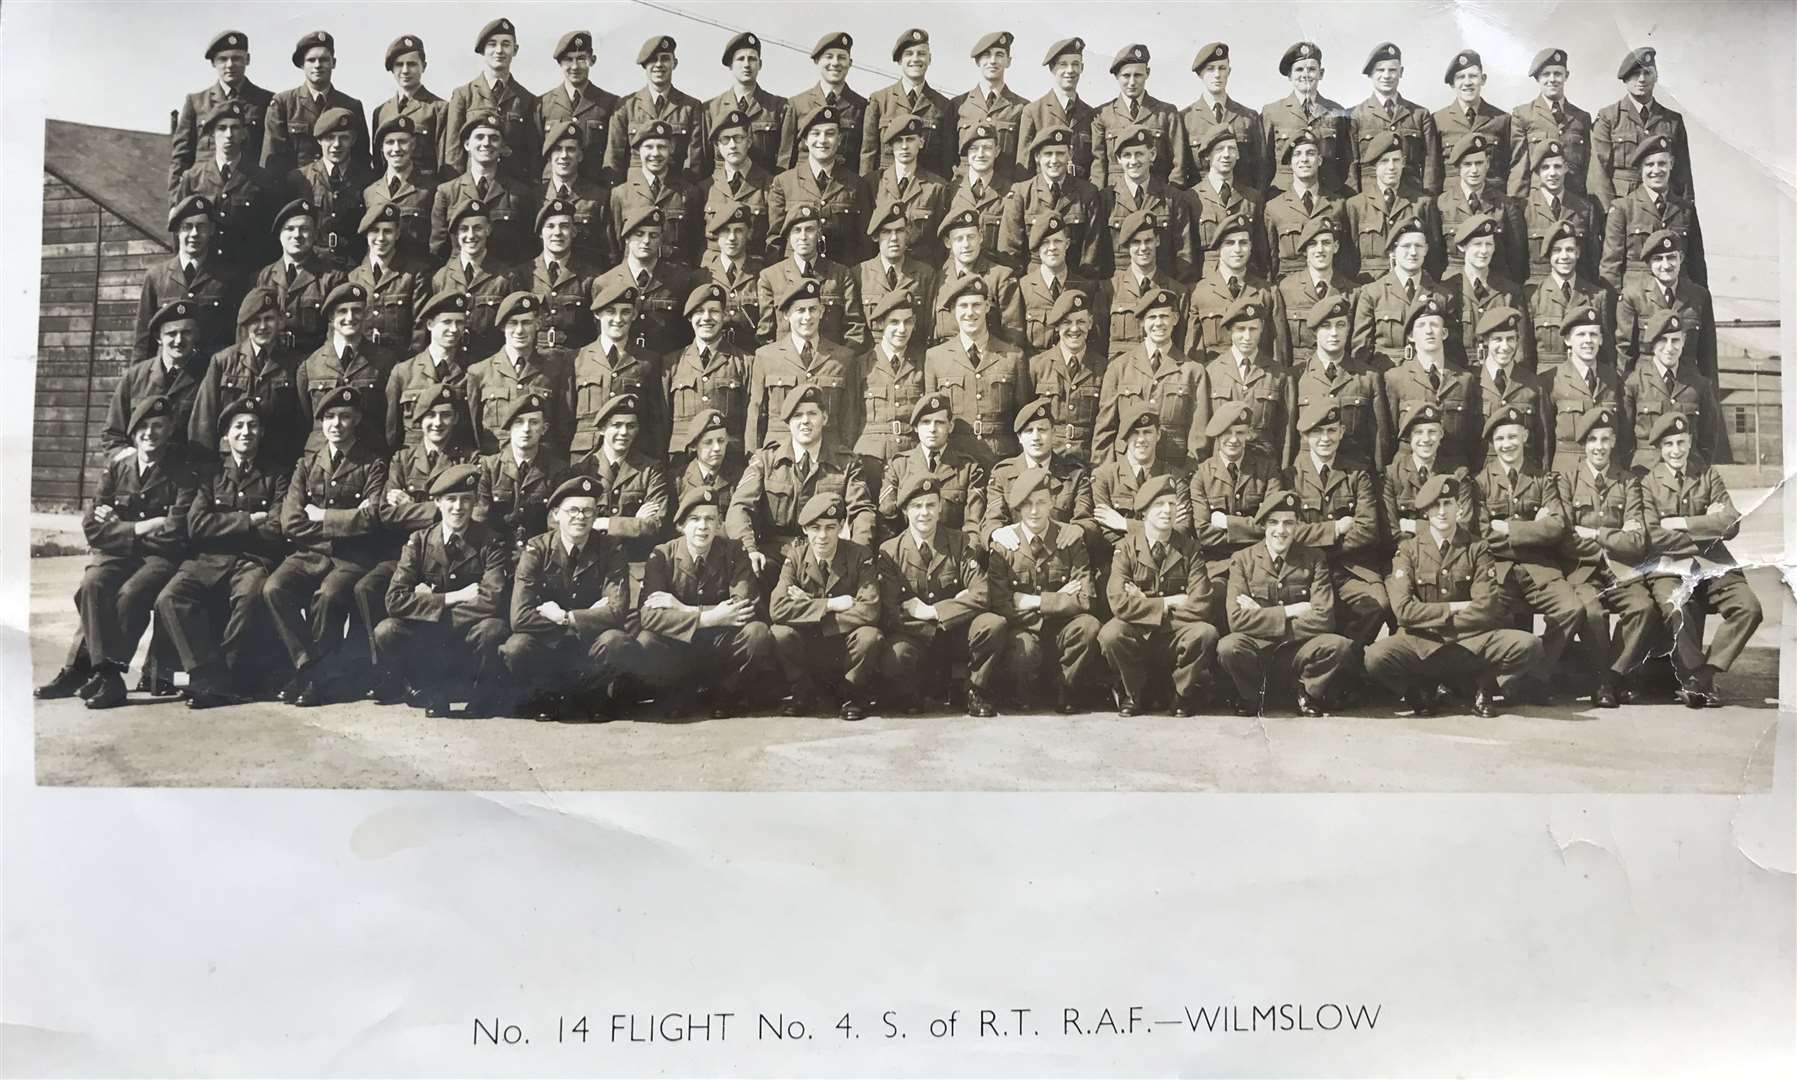 Peter Newman is in the back row, second from the right